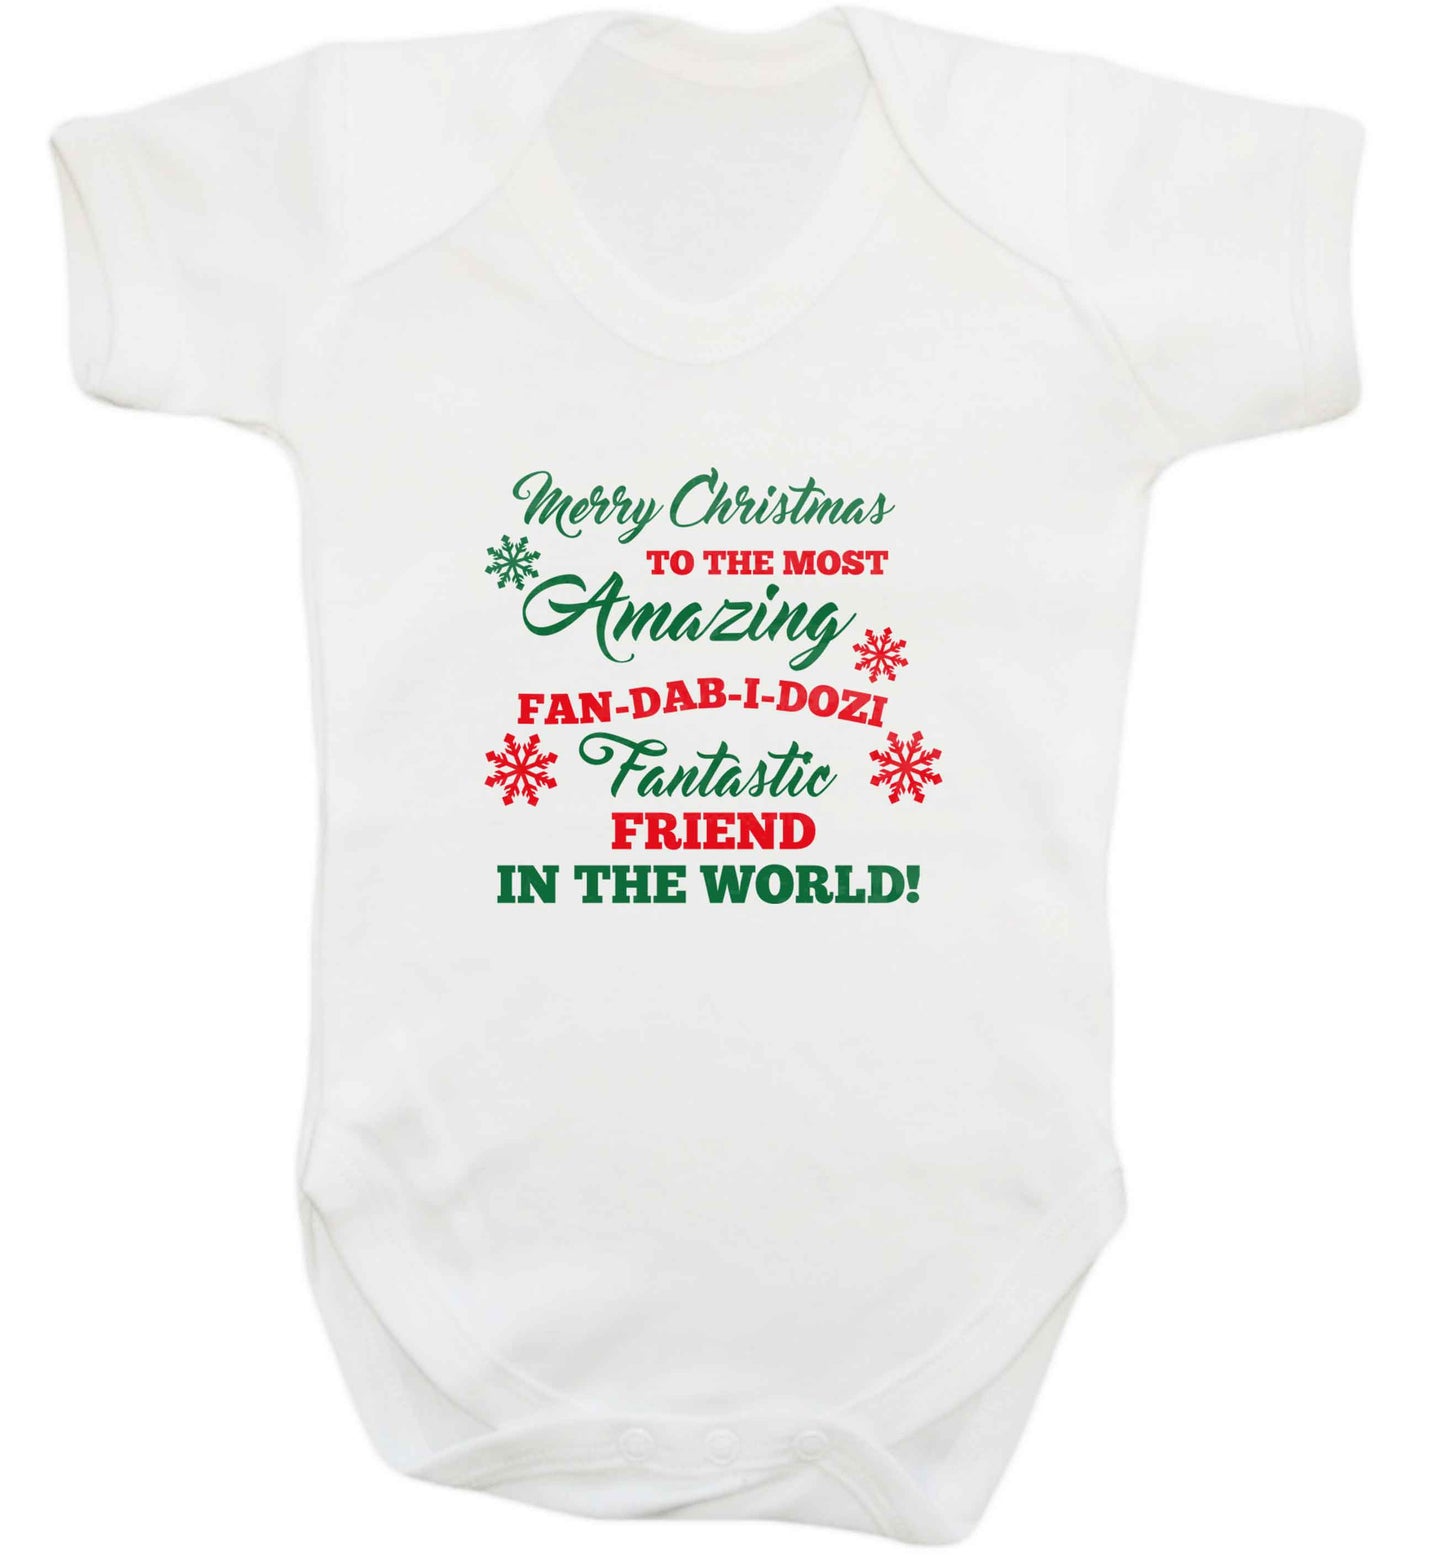 Merry Christmas to the most amazing fan-dab-i-dozi fantasic friend in the world baby vest white 18-24 months